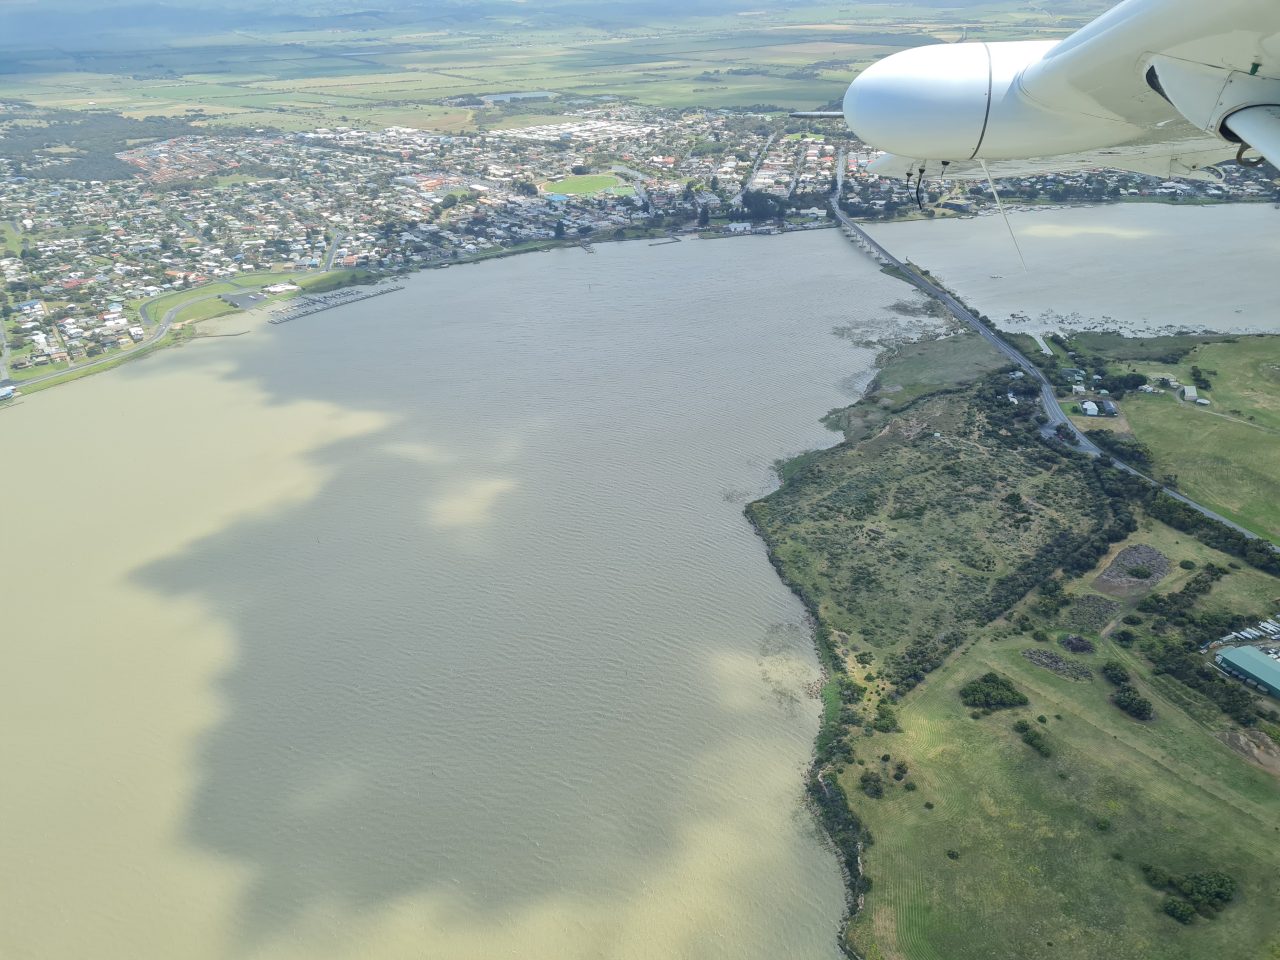 Aerial photo of a bend in a wide river, filled with light brown water.  The sky is not visible but shadows from the clouds are visible on the surface of the water. There is a bridge crossing the river to a town. Green farm paddocks surround the town. THe wing of the plane is in the top right corner of the photo.